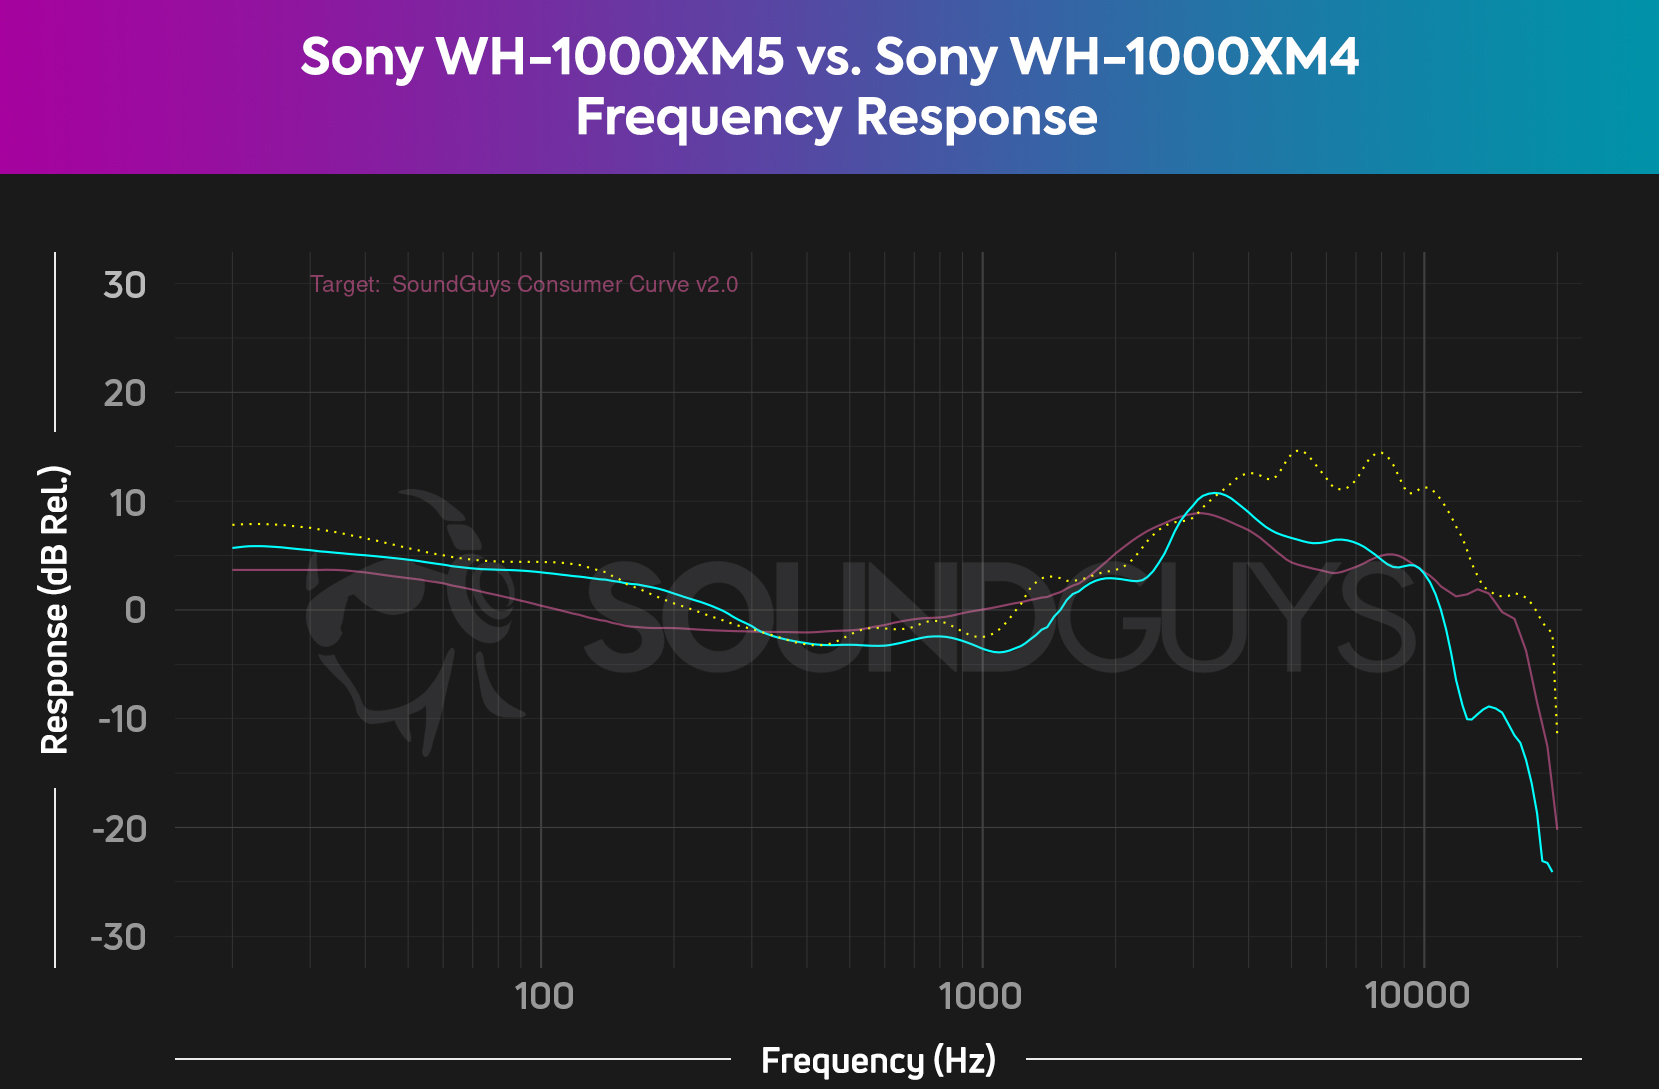 The Sony WH-1000XM4 has far more emphasized highs than the WH-1000XM5